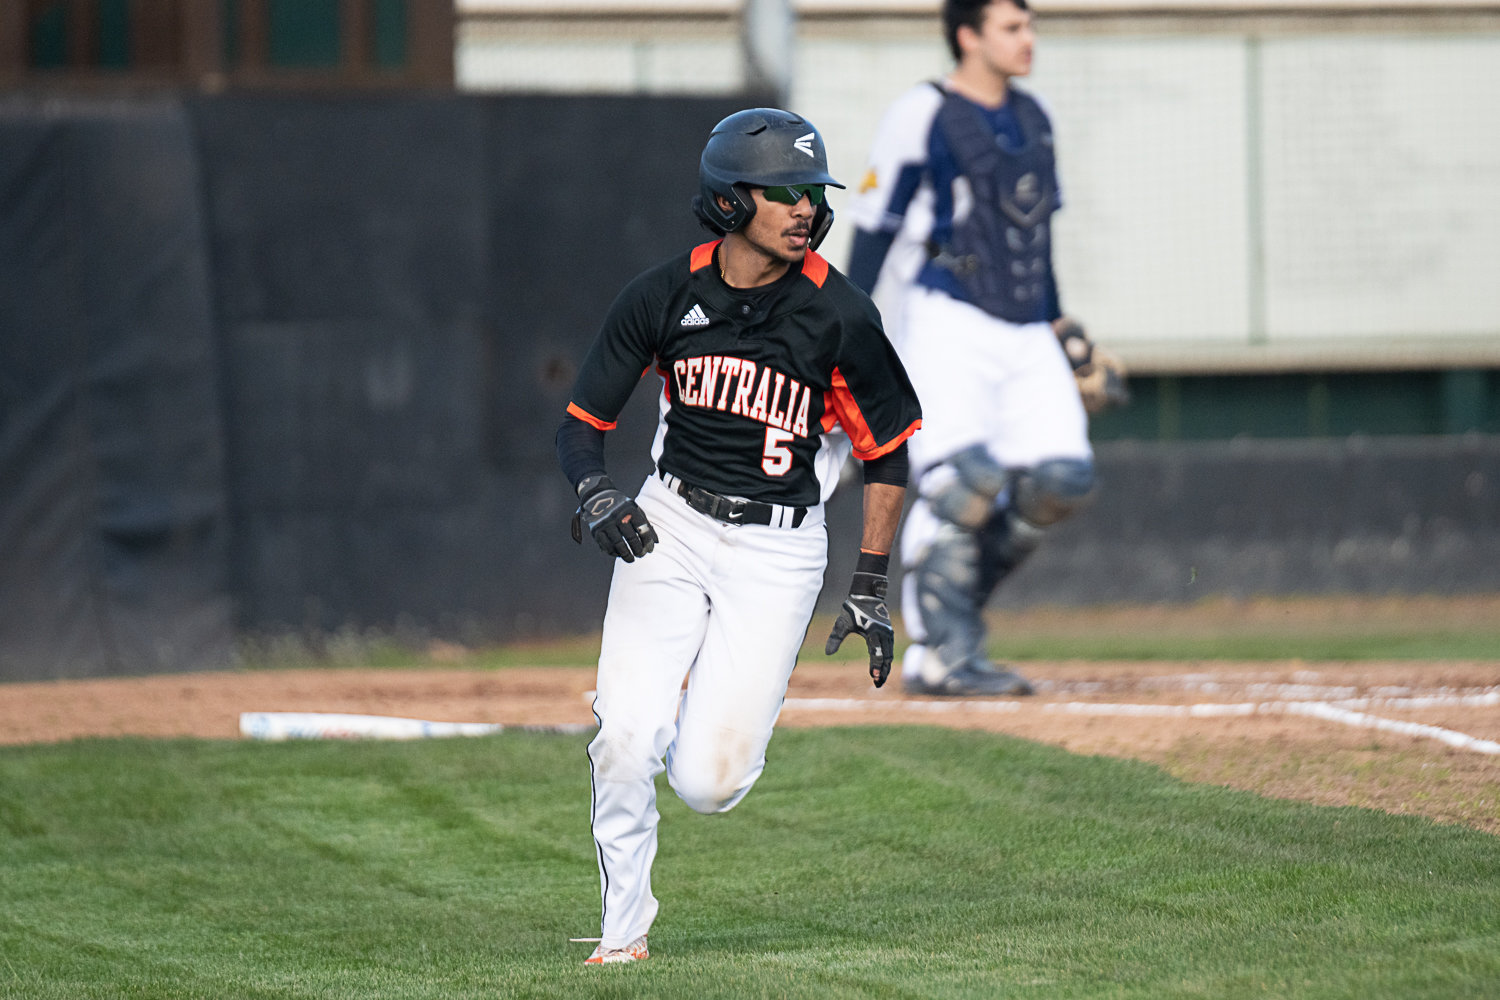 Moshie Eport-Tartios takes a wide turn out of the box on a double in the first inning of Centralia's 14-13 win over Aberdeen on March 21.